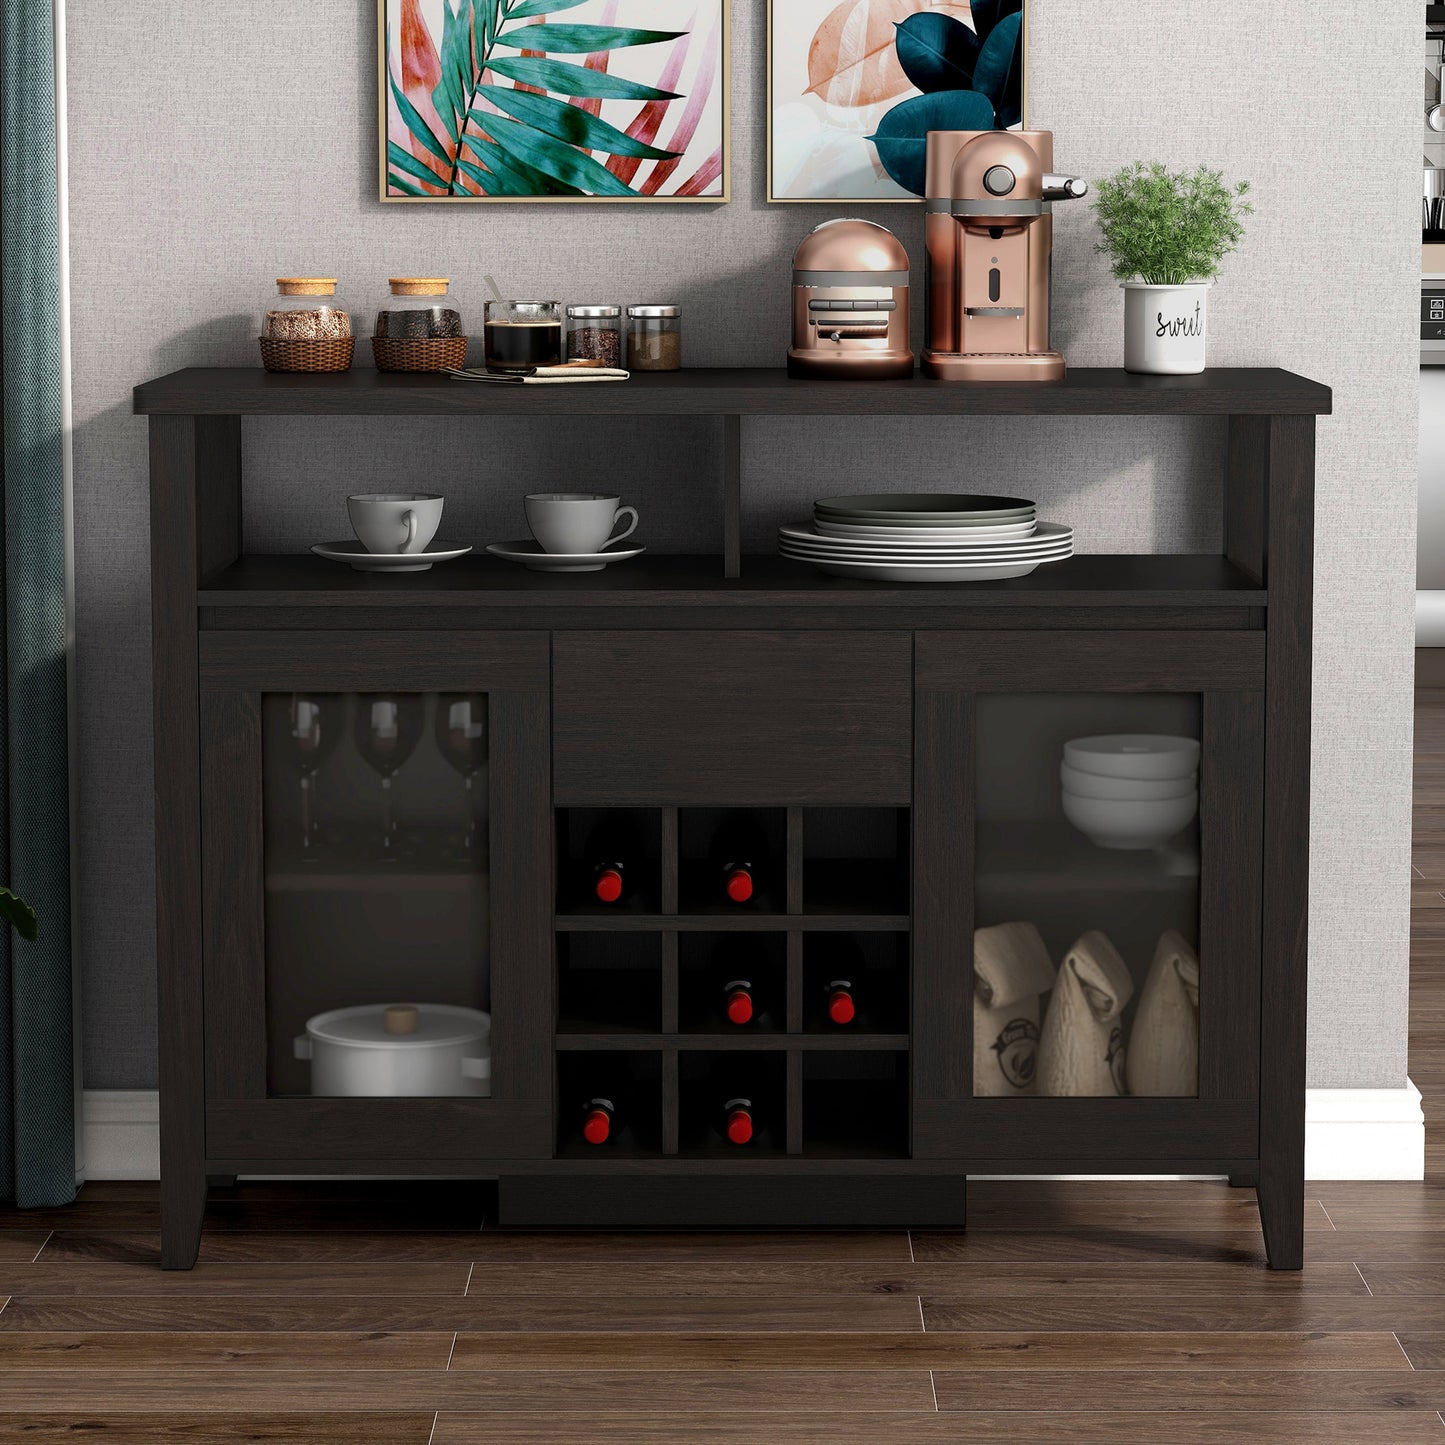 Front-facing transitional espresso nine-bottle storage buffet with glass doors in a dining room with accessories